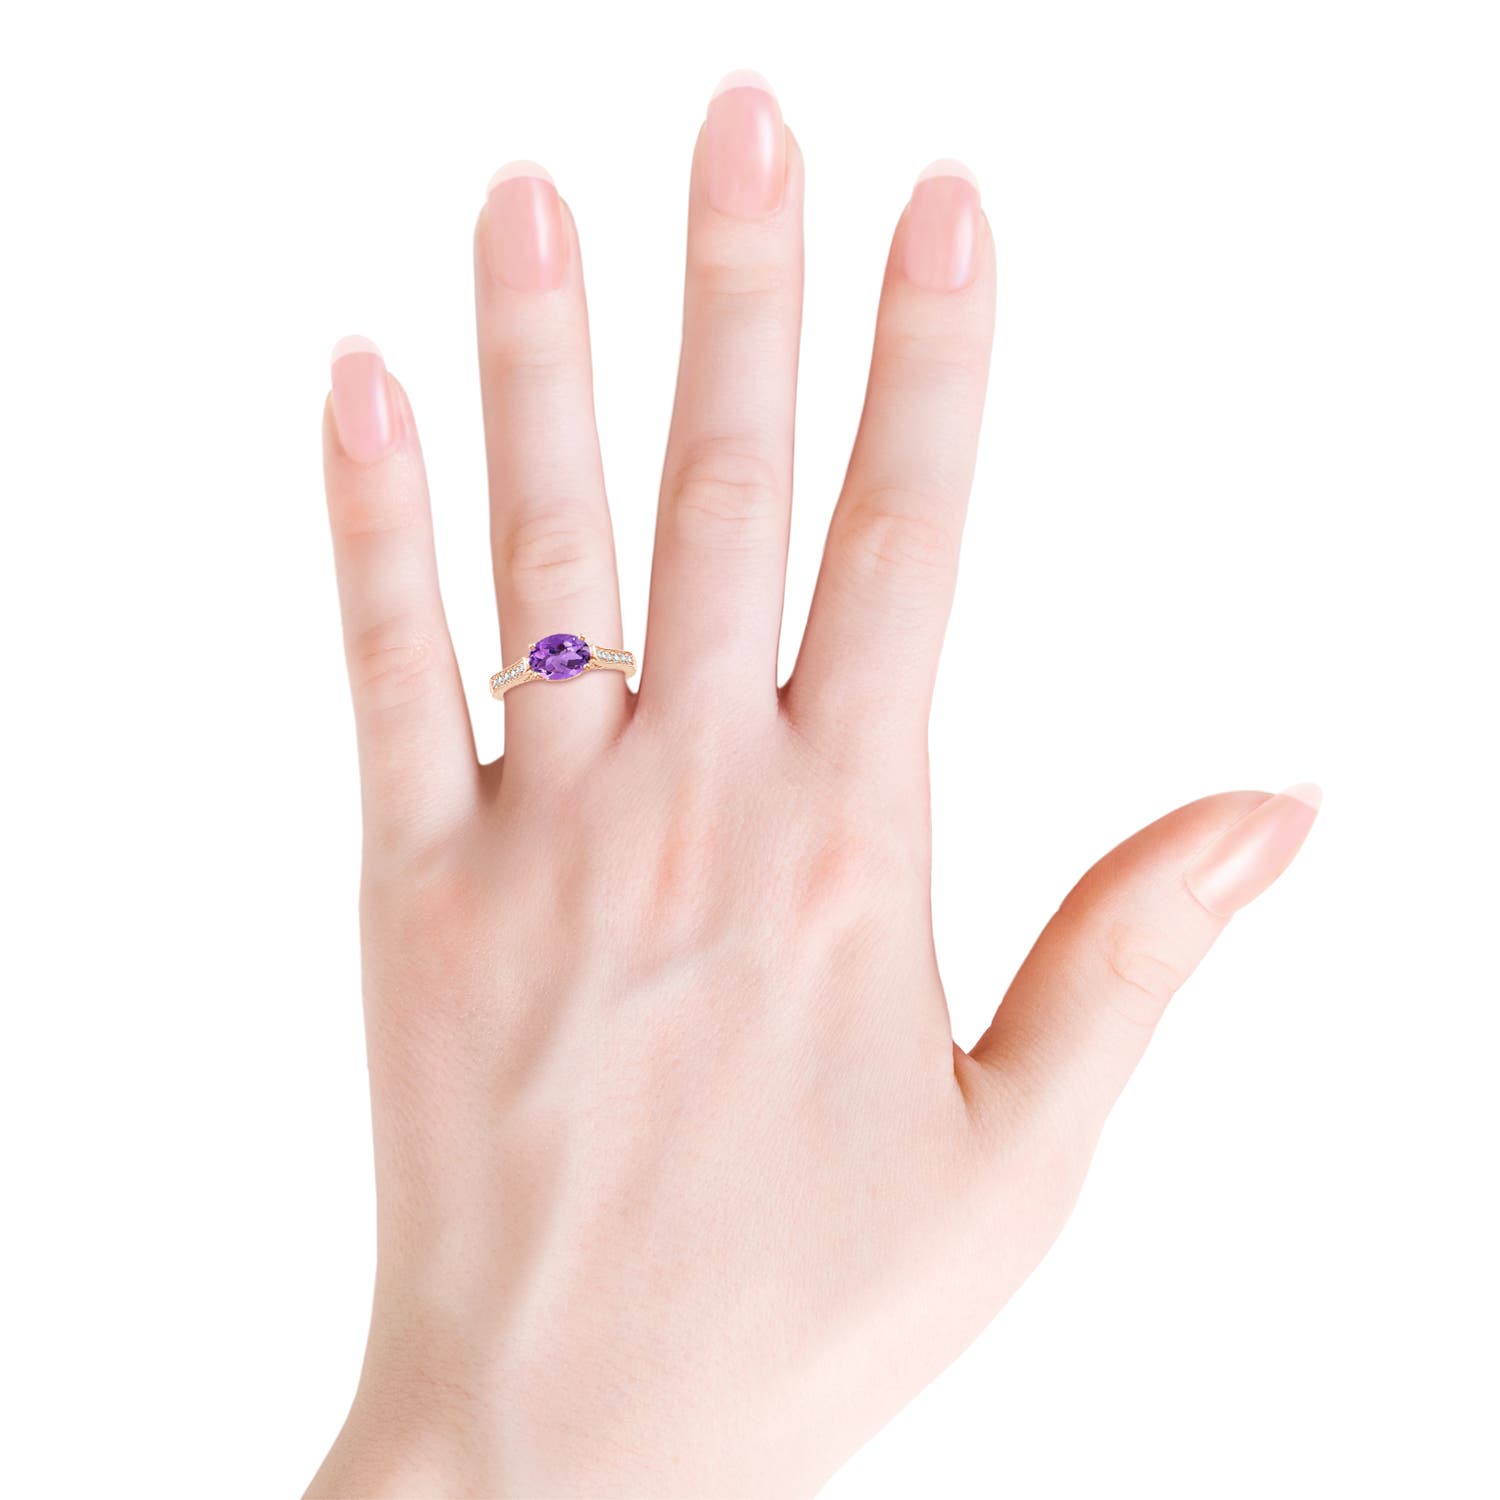 AA - Amethyst / 1.29 CT / 14 KT Rose Gold